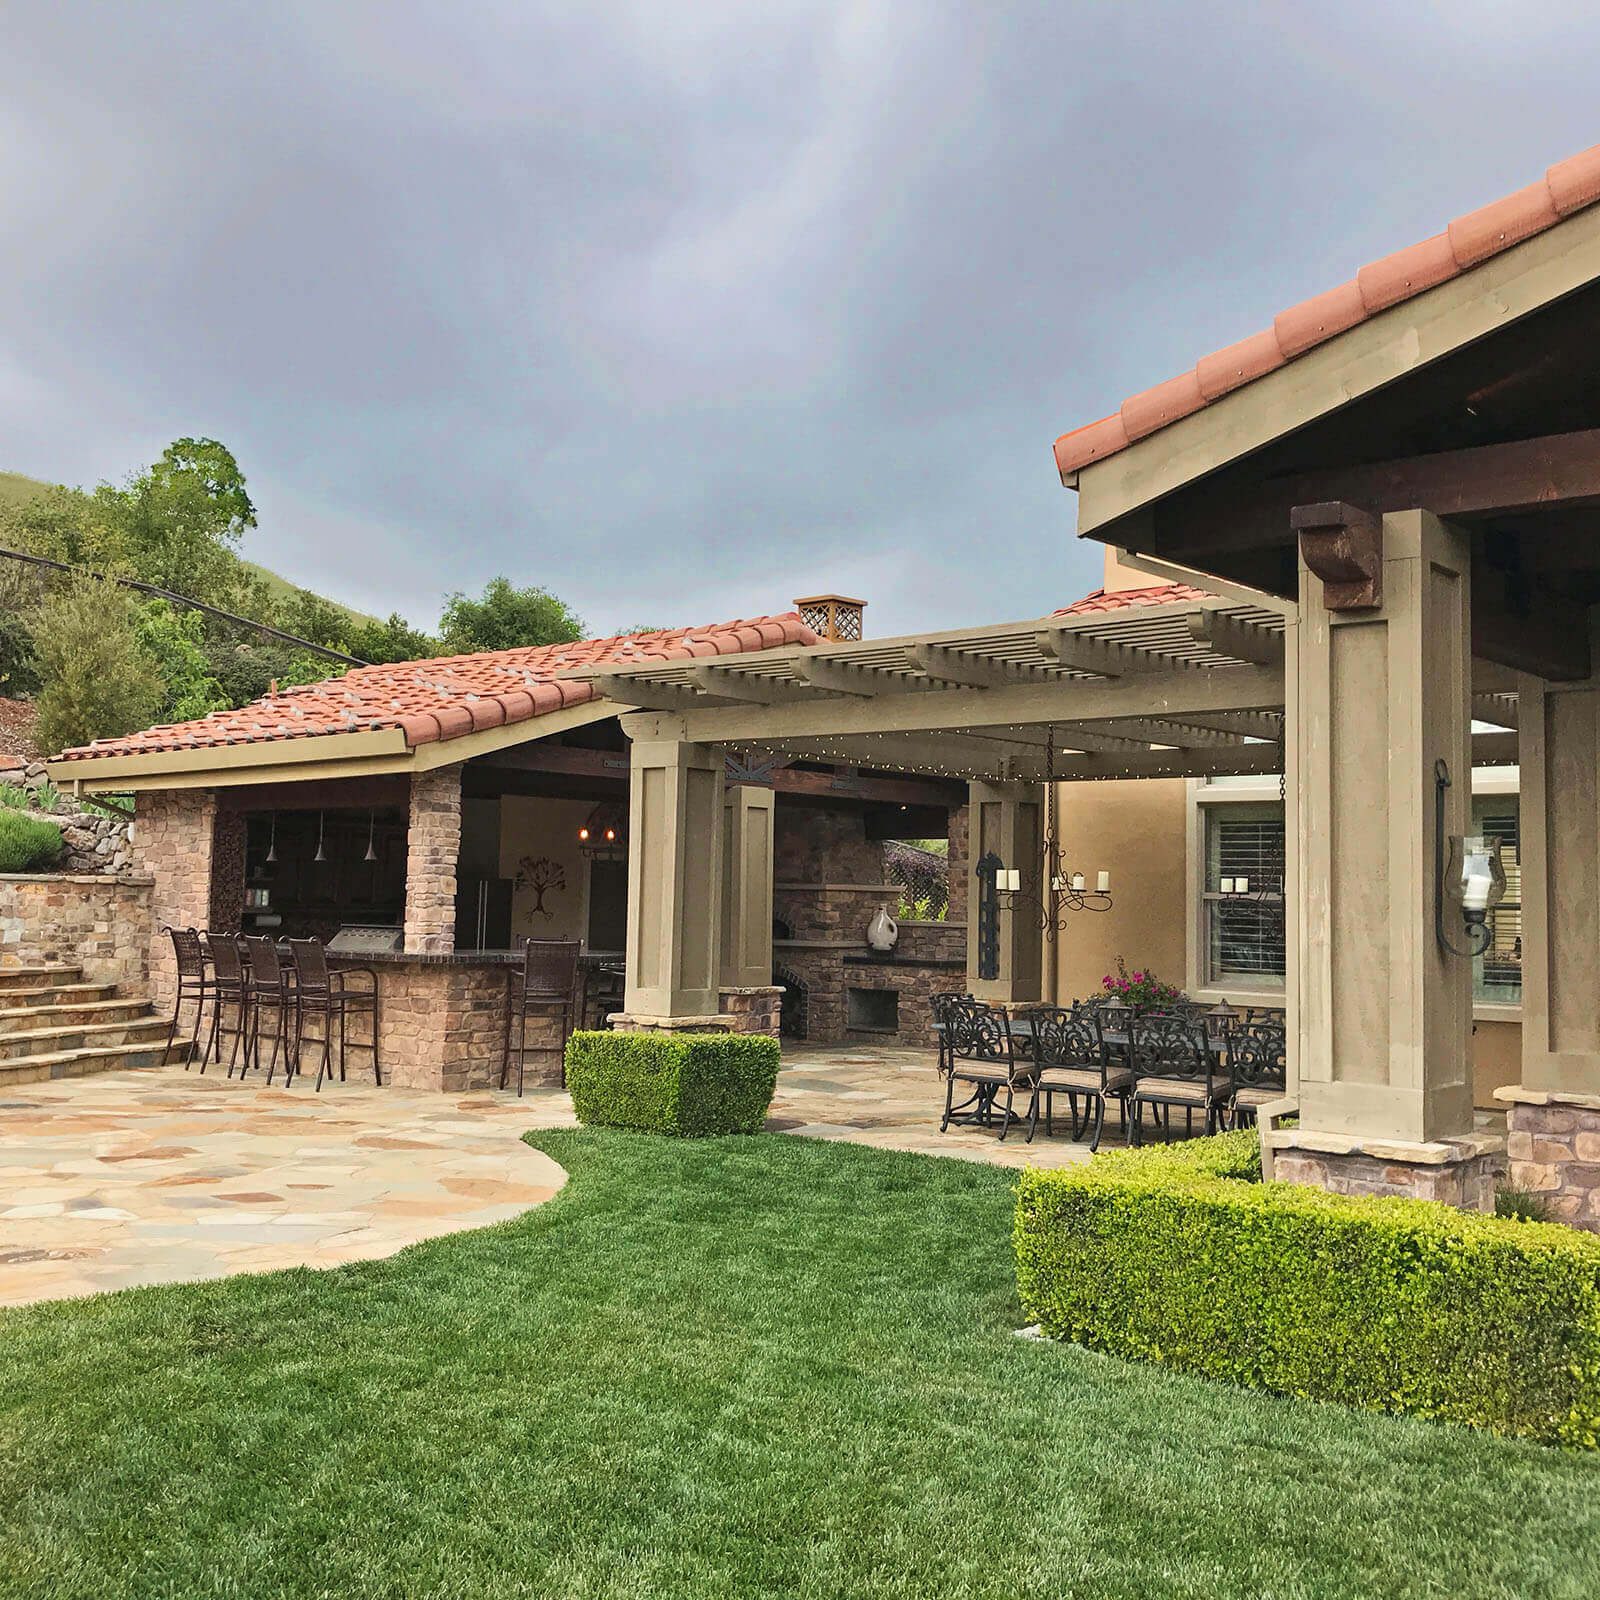 Tiered veranda with slatted roof and connected all-weather structures with Mission-style roof tiles in a landscape with a warm sandstone patio, lawn, and traditional boxwood hedge